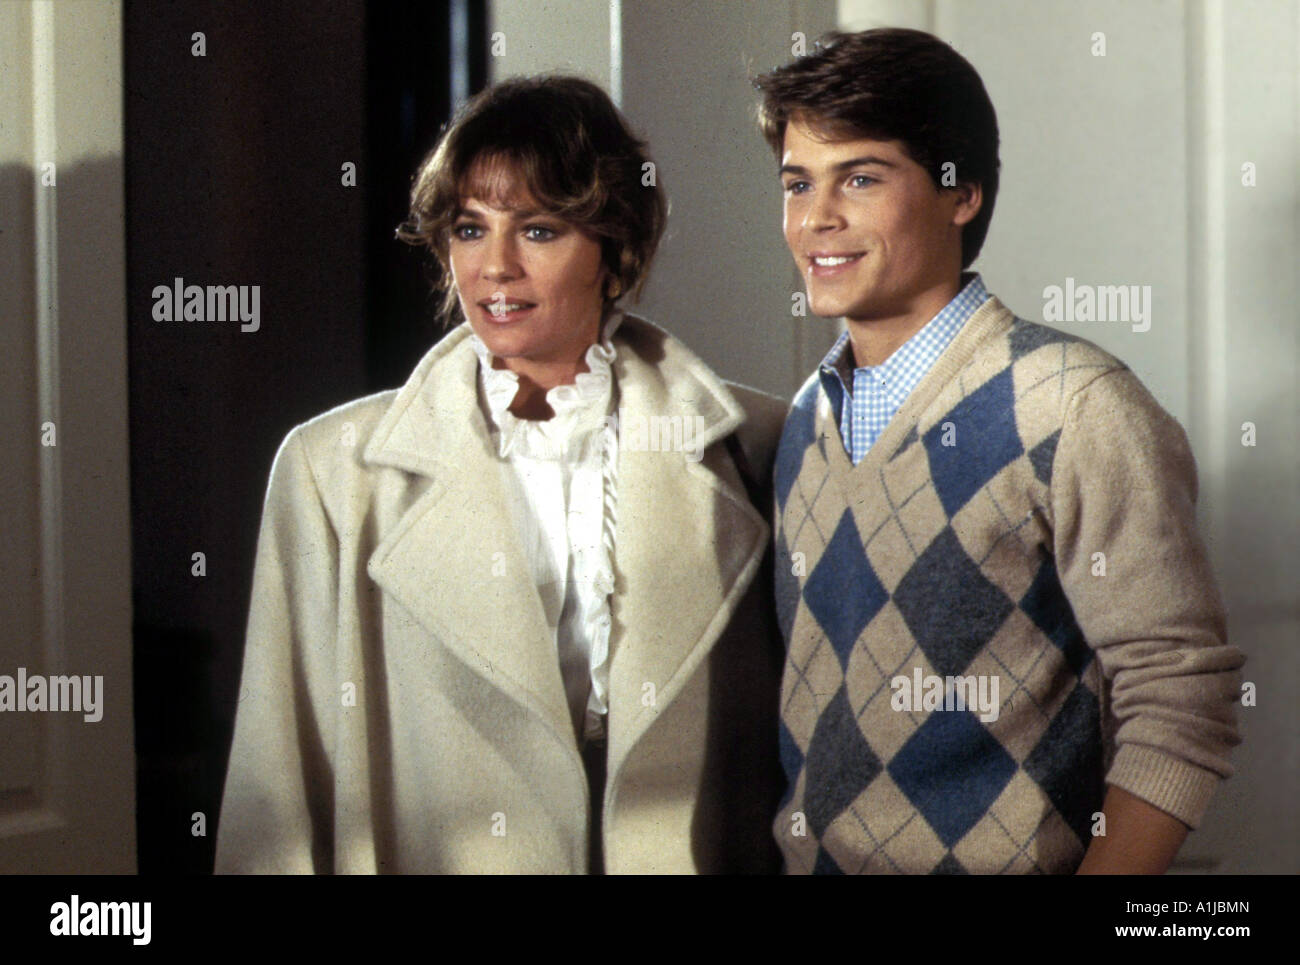 Class Year 1983 Director Lewis John Carlino Jacqueline Bisset Rob Lowe Stock Photo